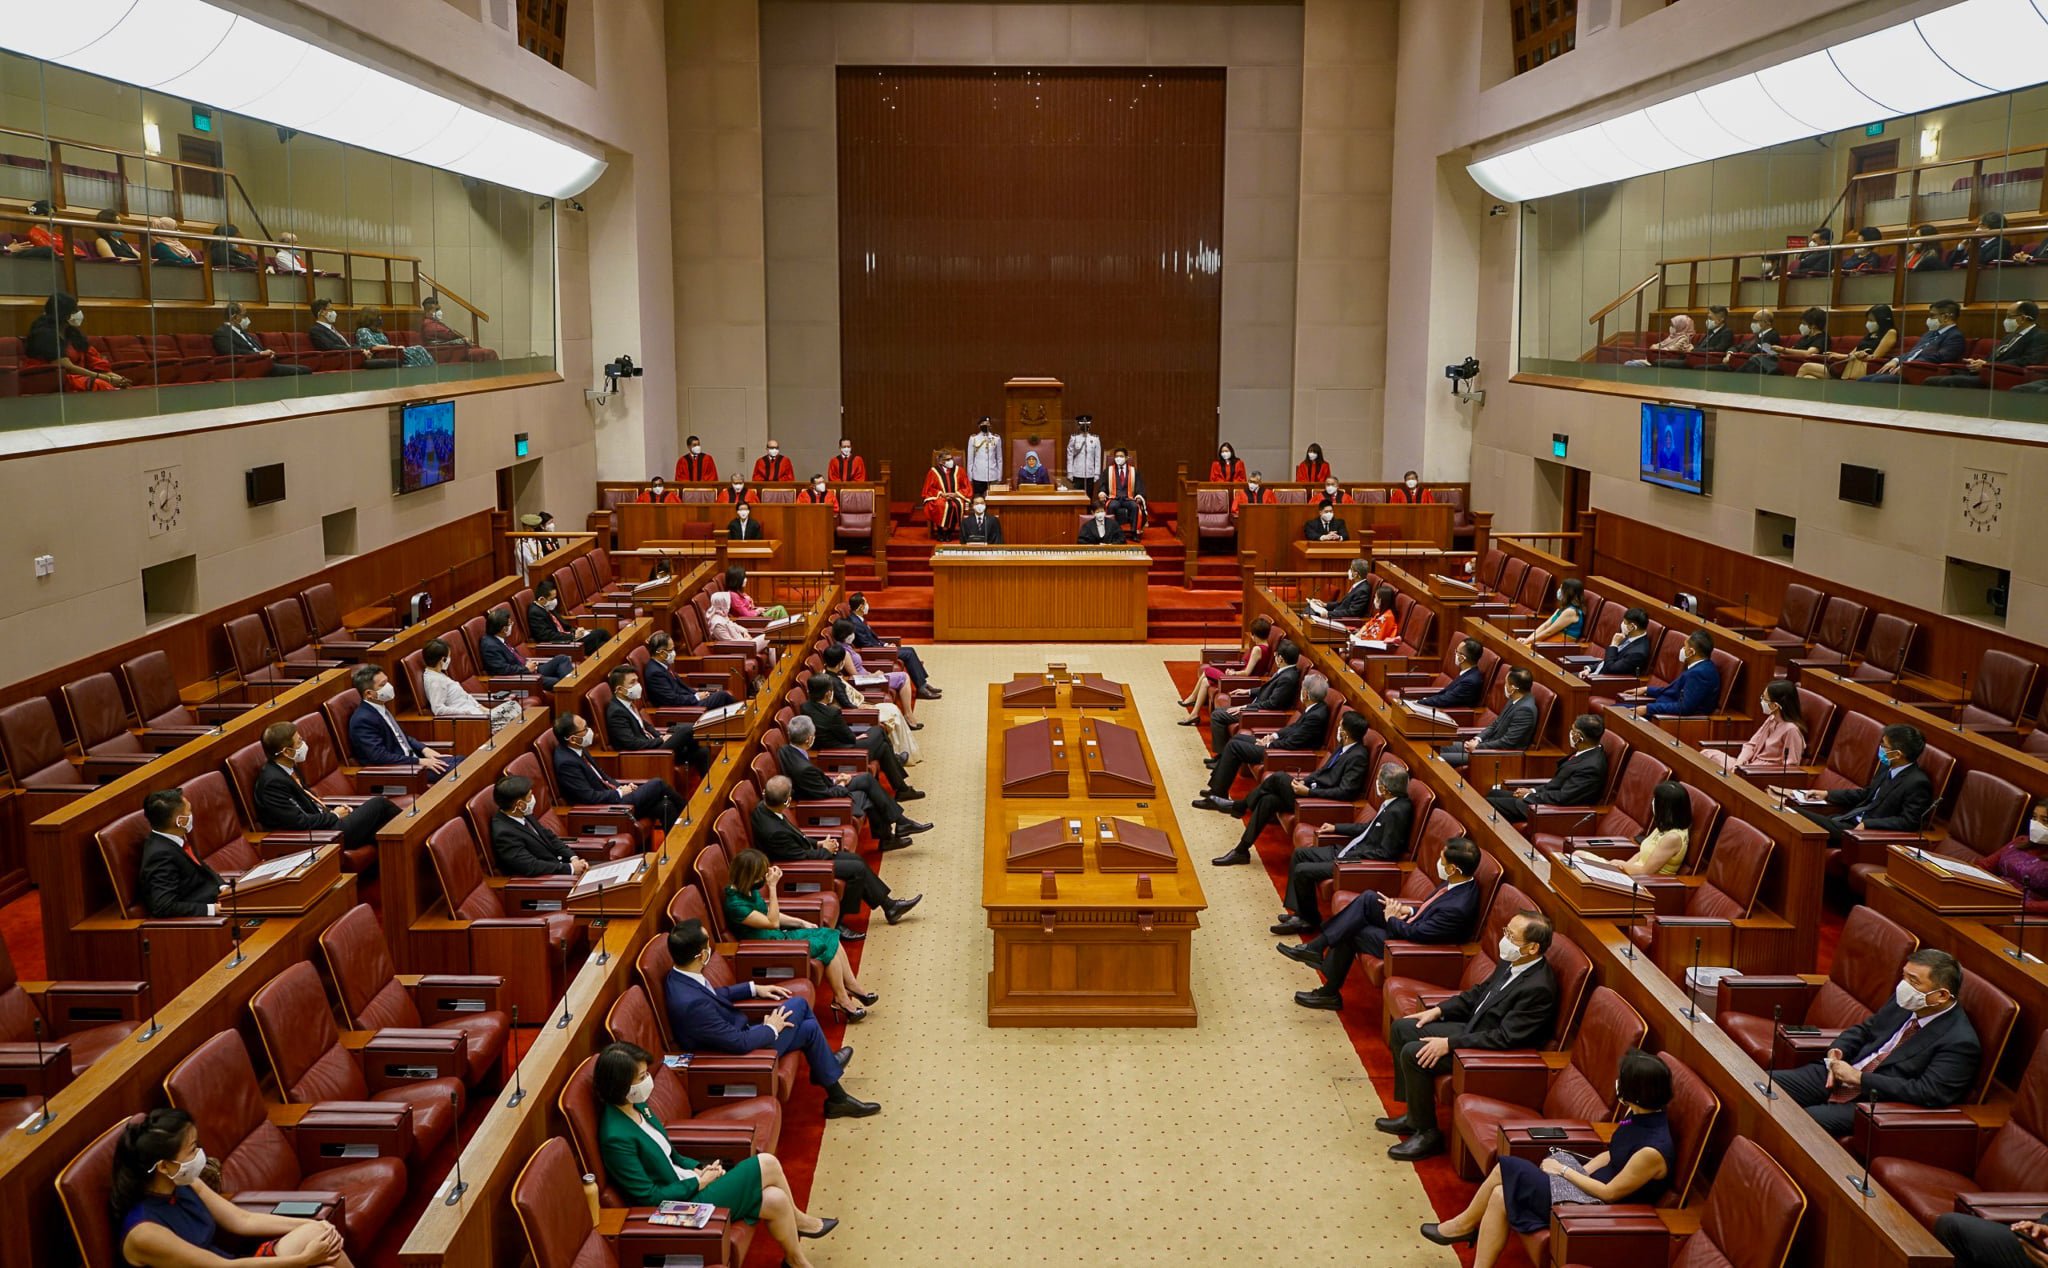 S'pore To Livestream Parliament Sessions, Can Watch MPs Debate In Realtime